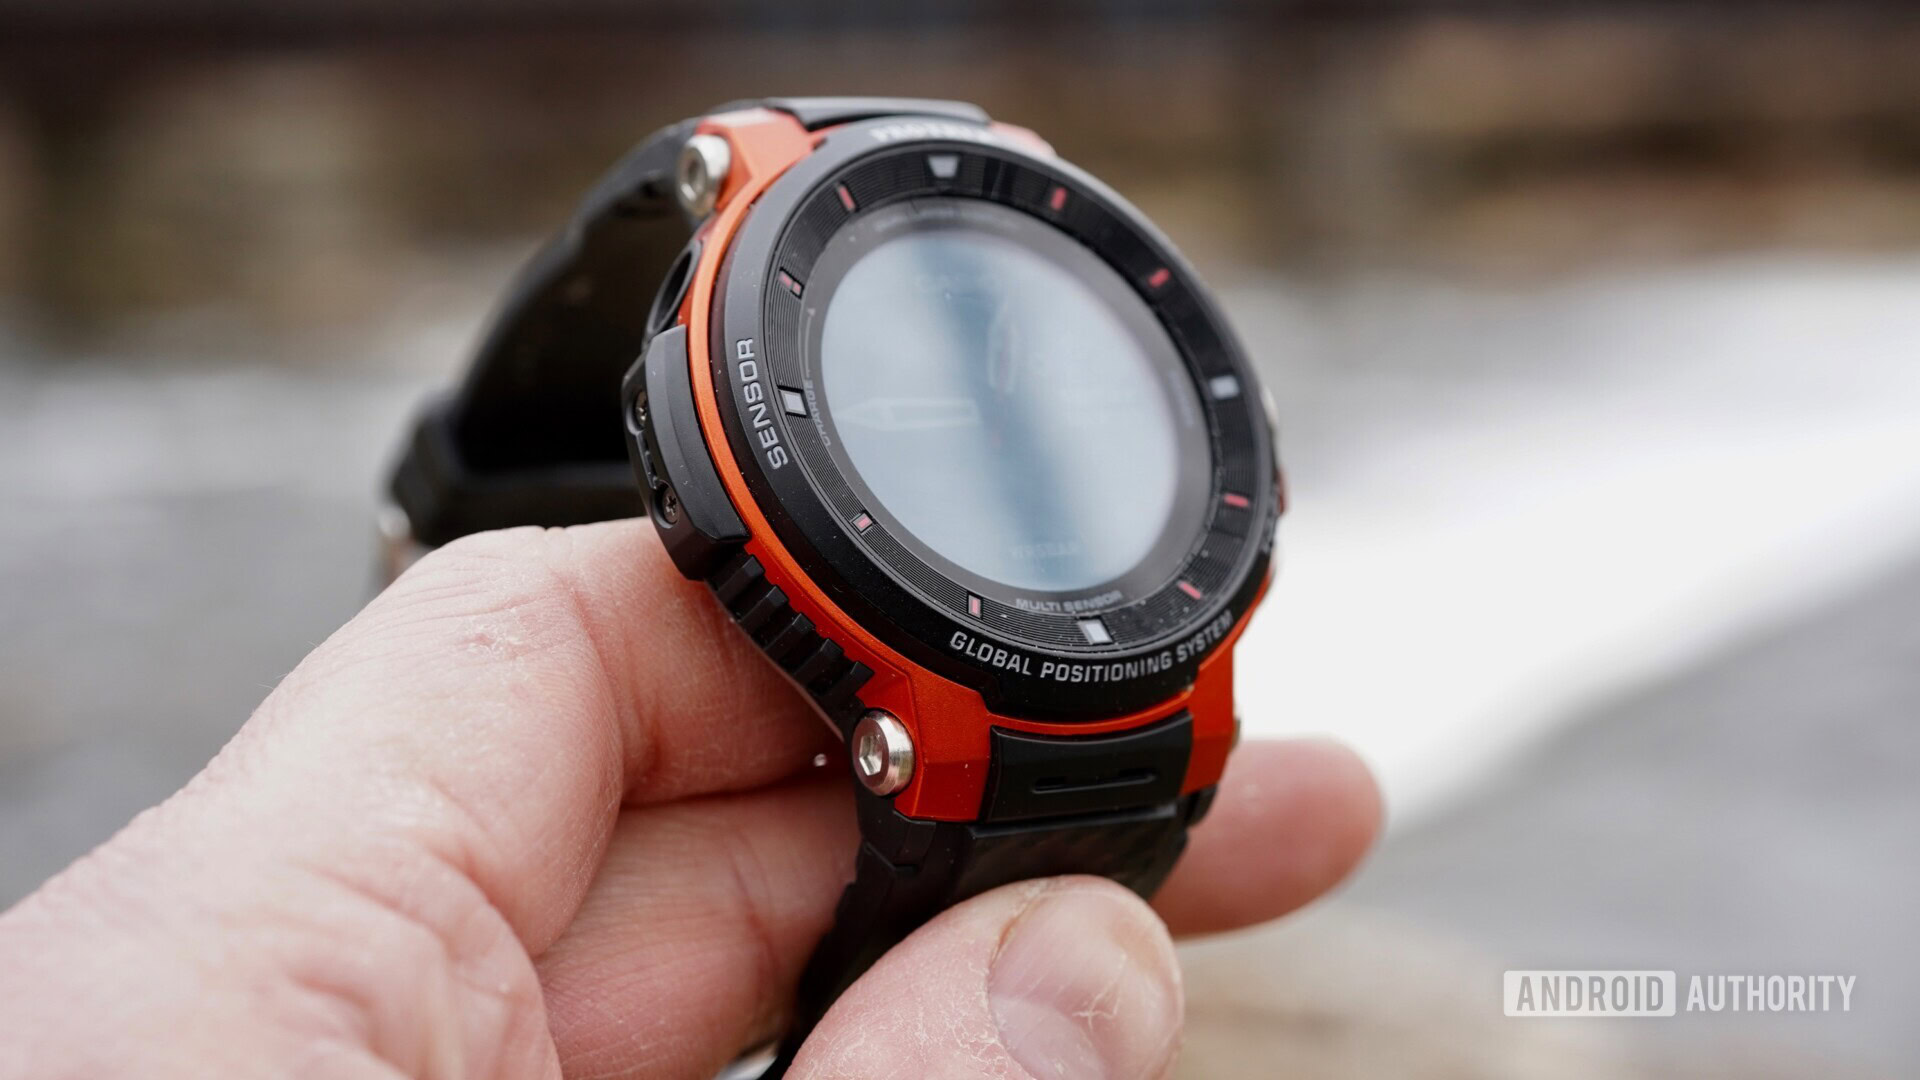 Casio Pro-Trek WSD F30 Review: A Smartwatch For Outdoor Pursuits